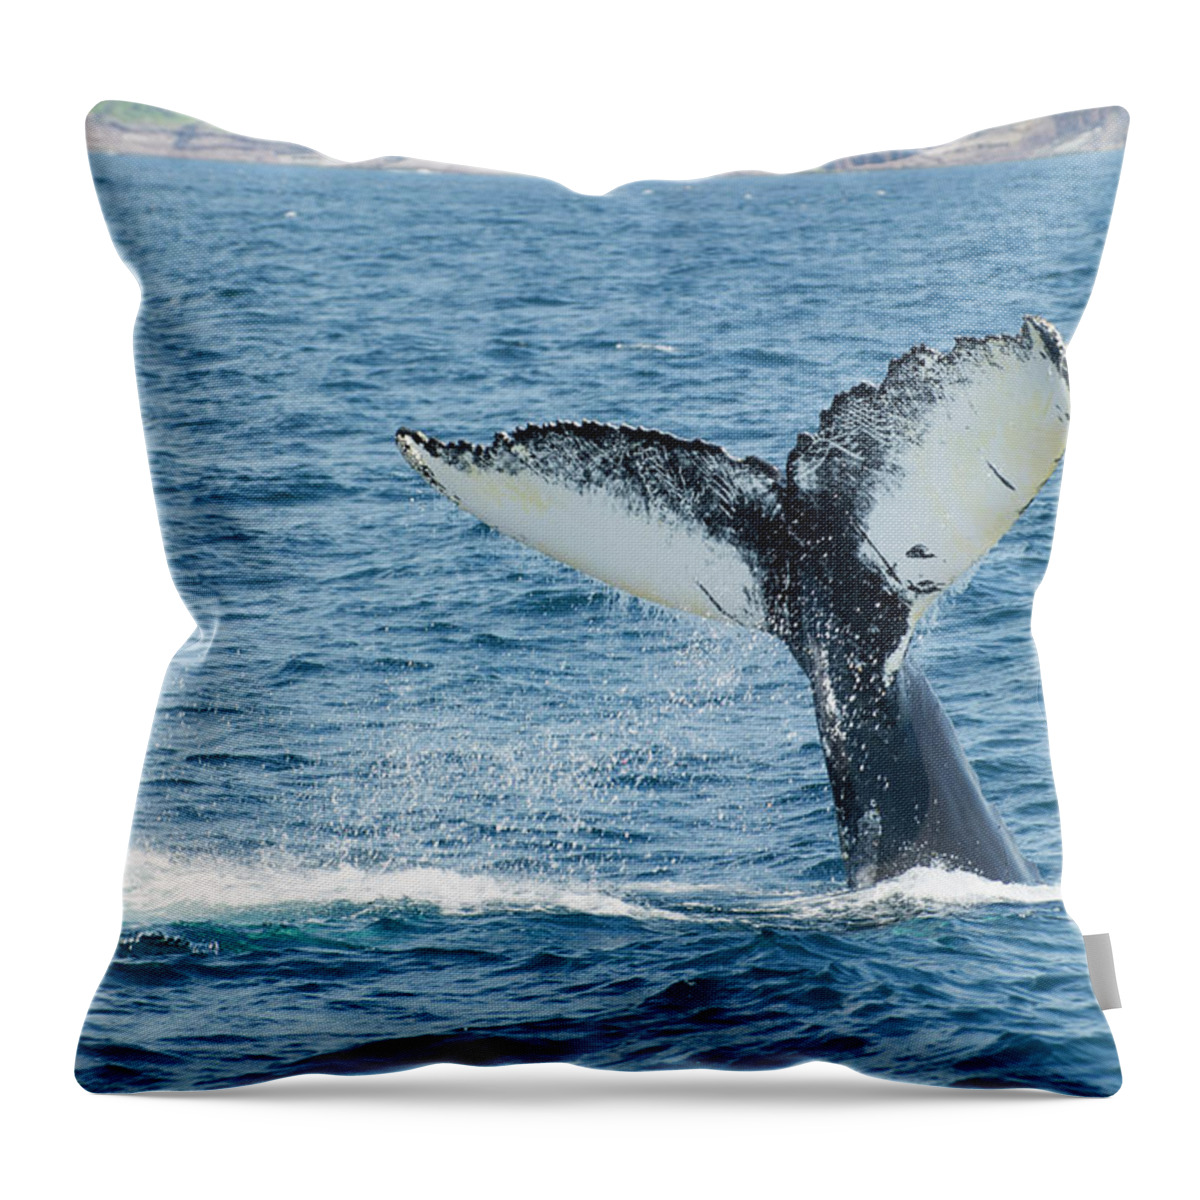 One Animal Throw Pillow featuring the photograph Humpback Whale Megaptera Novaeangliae by Aluma Images